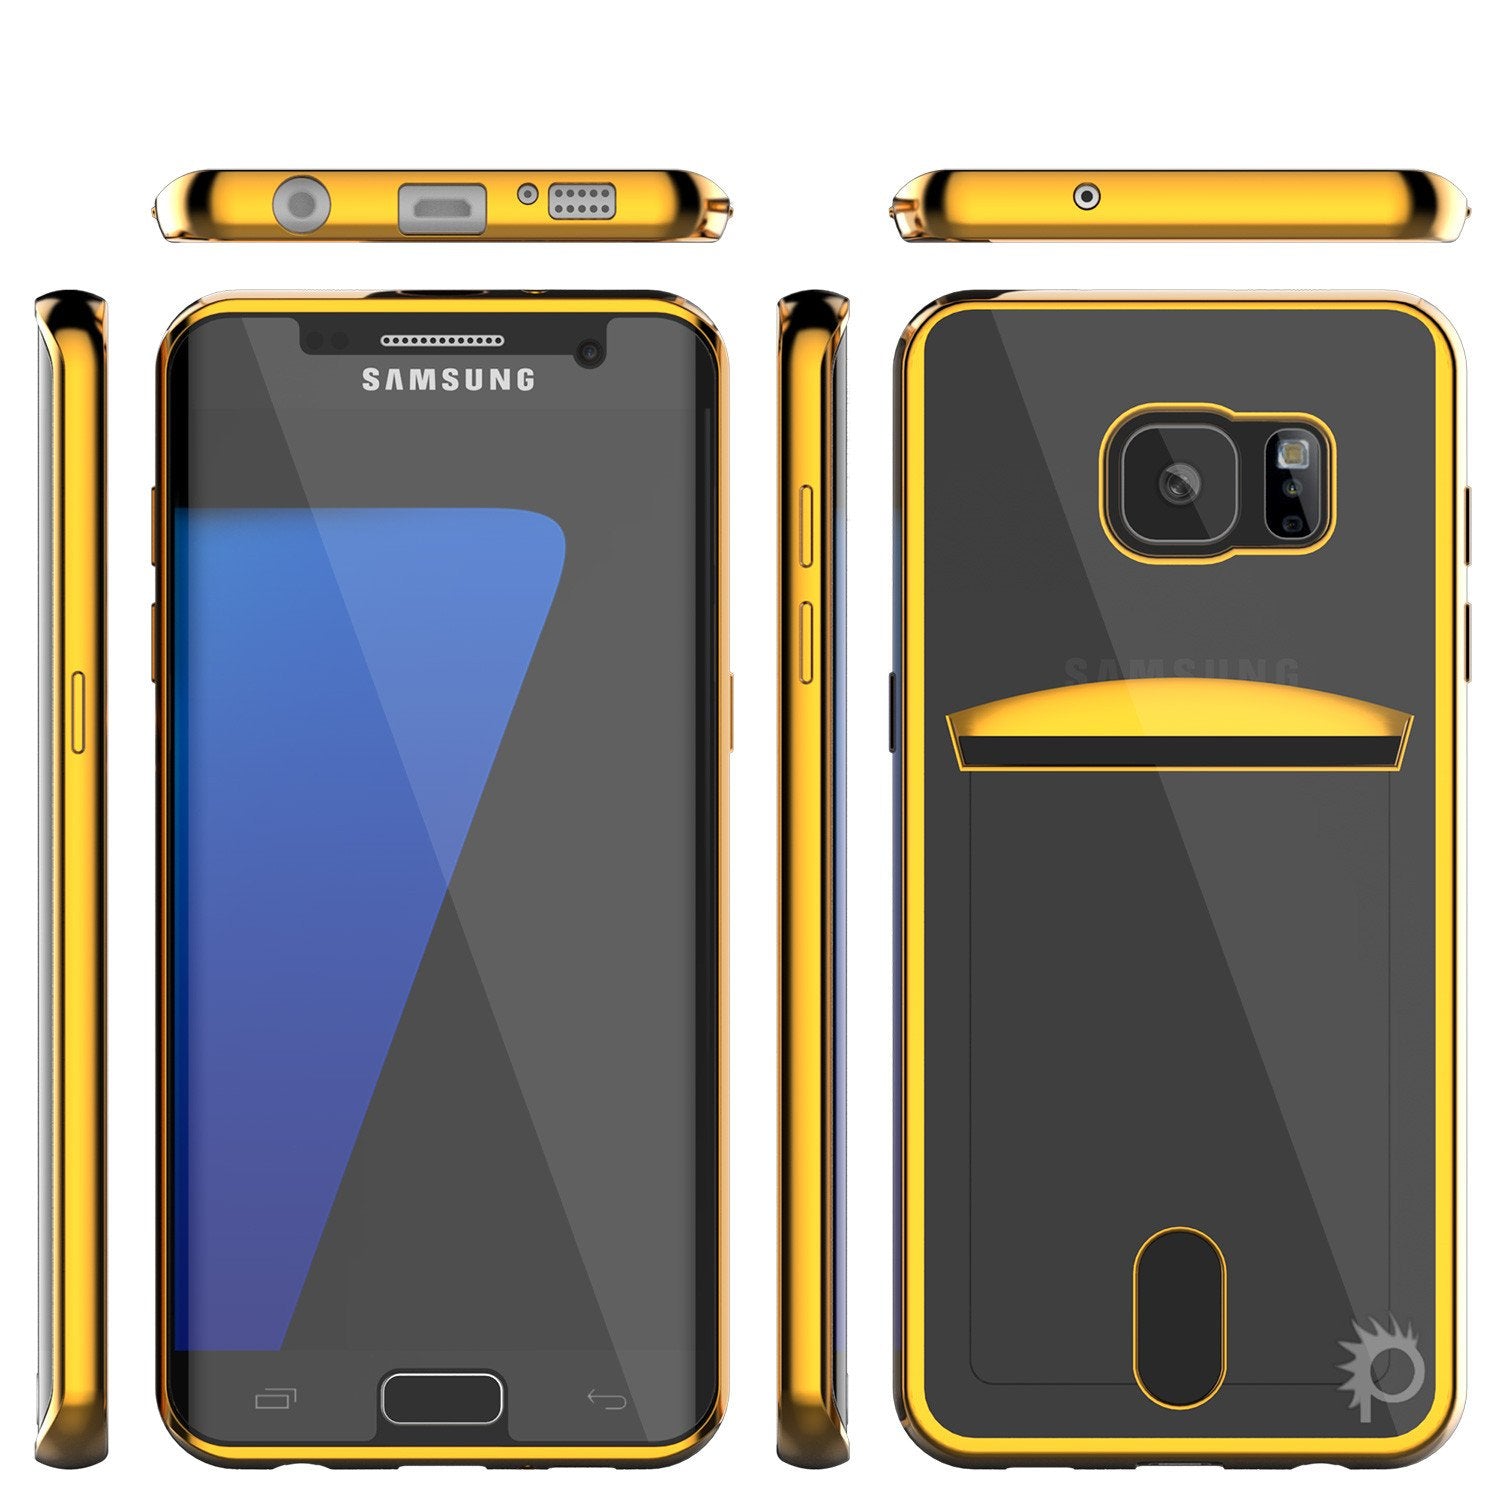 Galaxy S7 EDGE Case, PUNKCASE® LUCID Gold Series Ultra fit